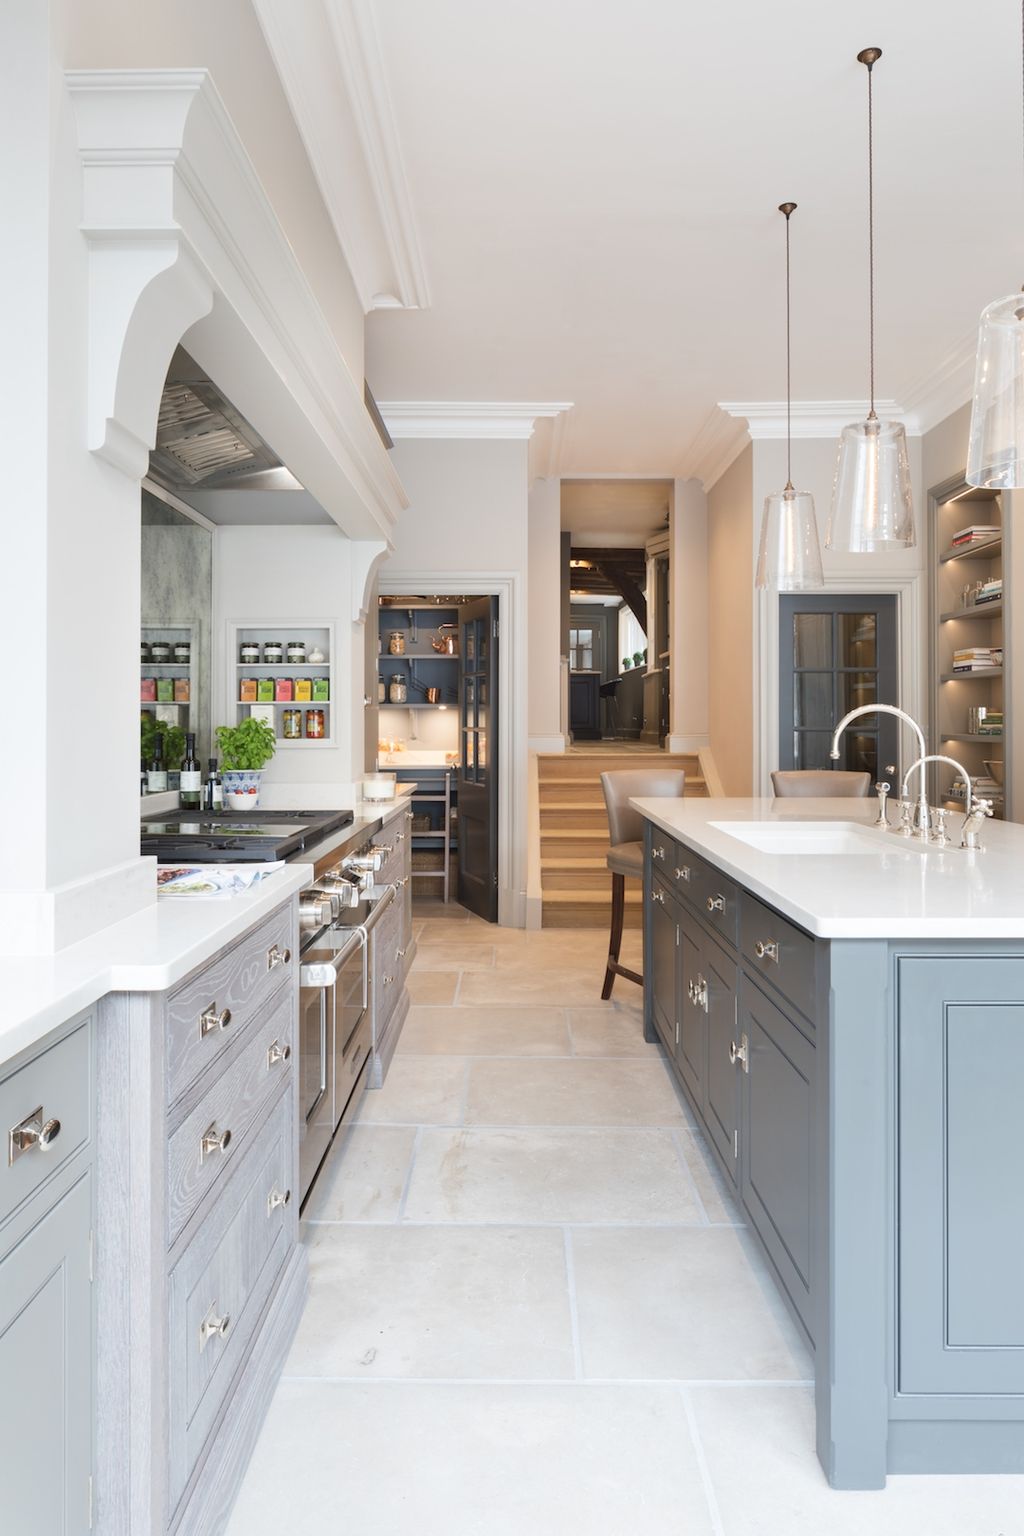 How we chose the Brampton Limestone floor tile for the Spenlow Kitchen in the Humphrey Munson St. Albans showroom